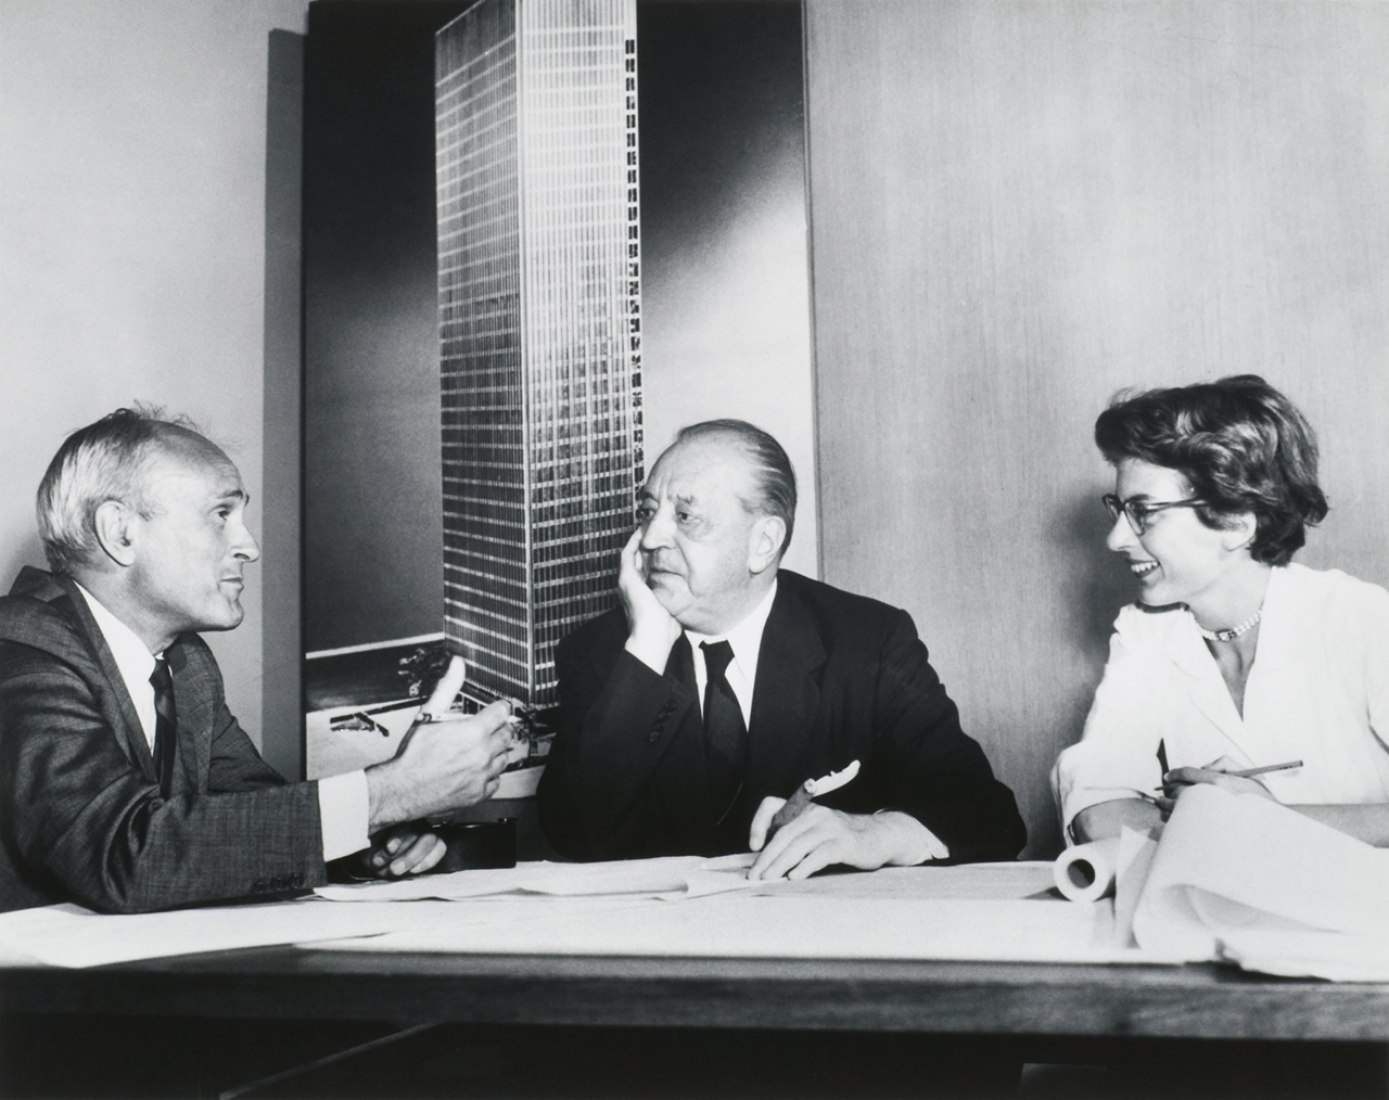 Philip Johnson, Ludwig Mies van der Rohe, and Phyllis Lambert in front of an image of the model for the Seagram building, New York, 1955. Gelatin silver print, 7 1/2 × 9 3/8 in. Photographer unknown. Fonds Phyllis Lambert, Canadian Centre for Architecture, Montreal. © United Press International.